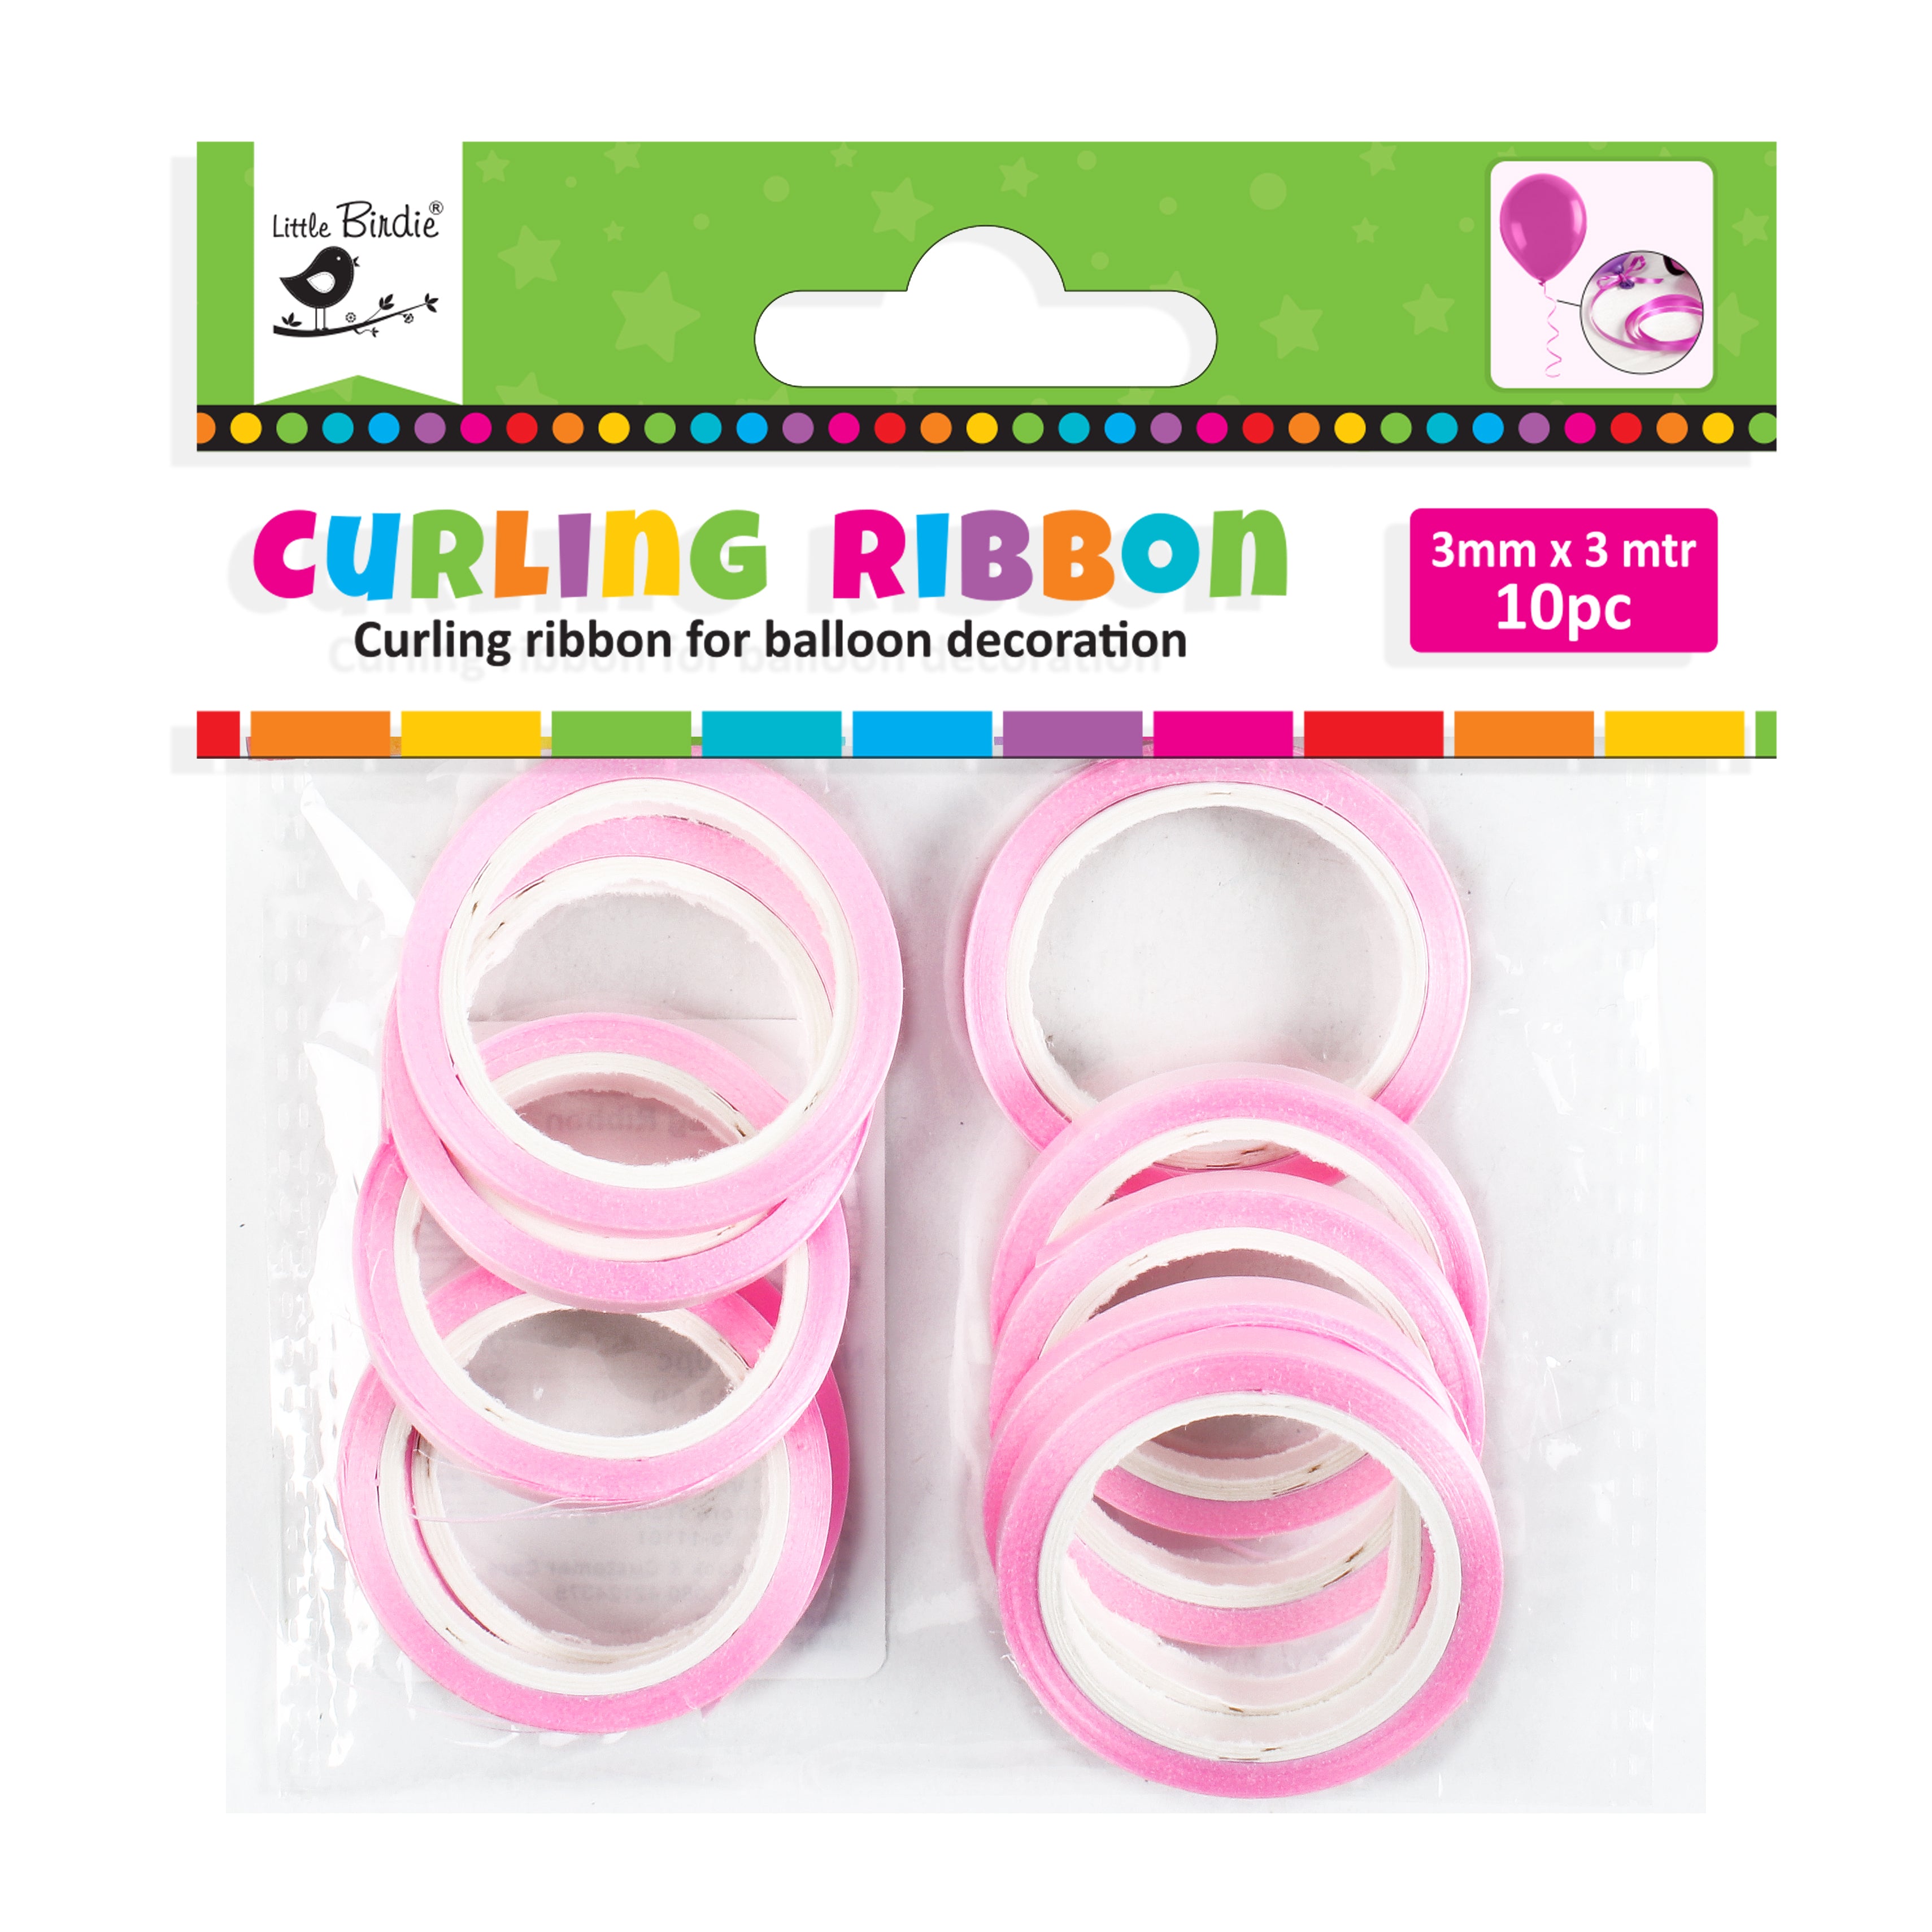 Curling Ribbon For Balloon Decoration 3mm X 3mtr Baby Pink 10pc